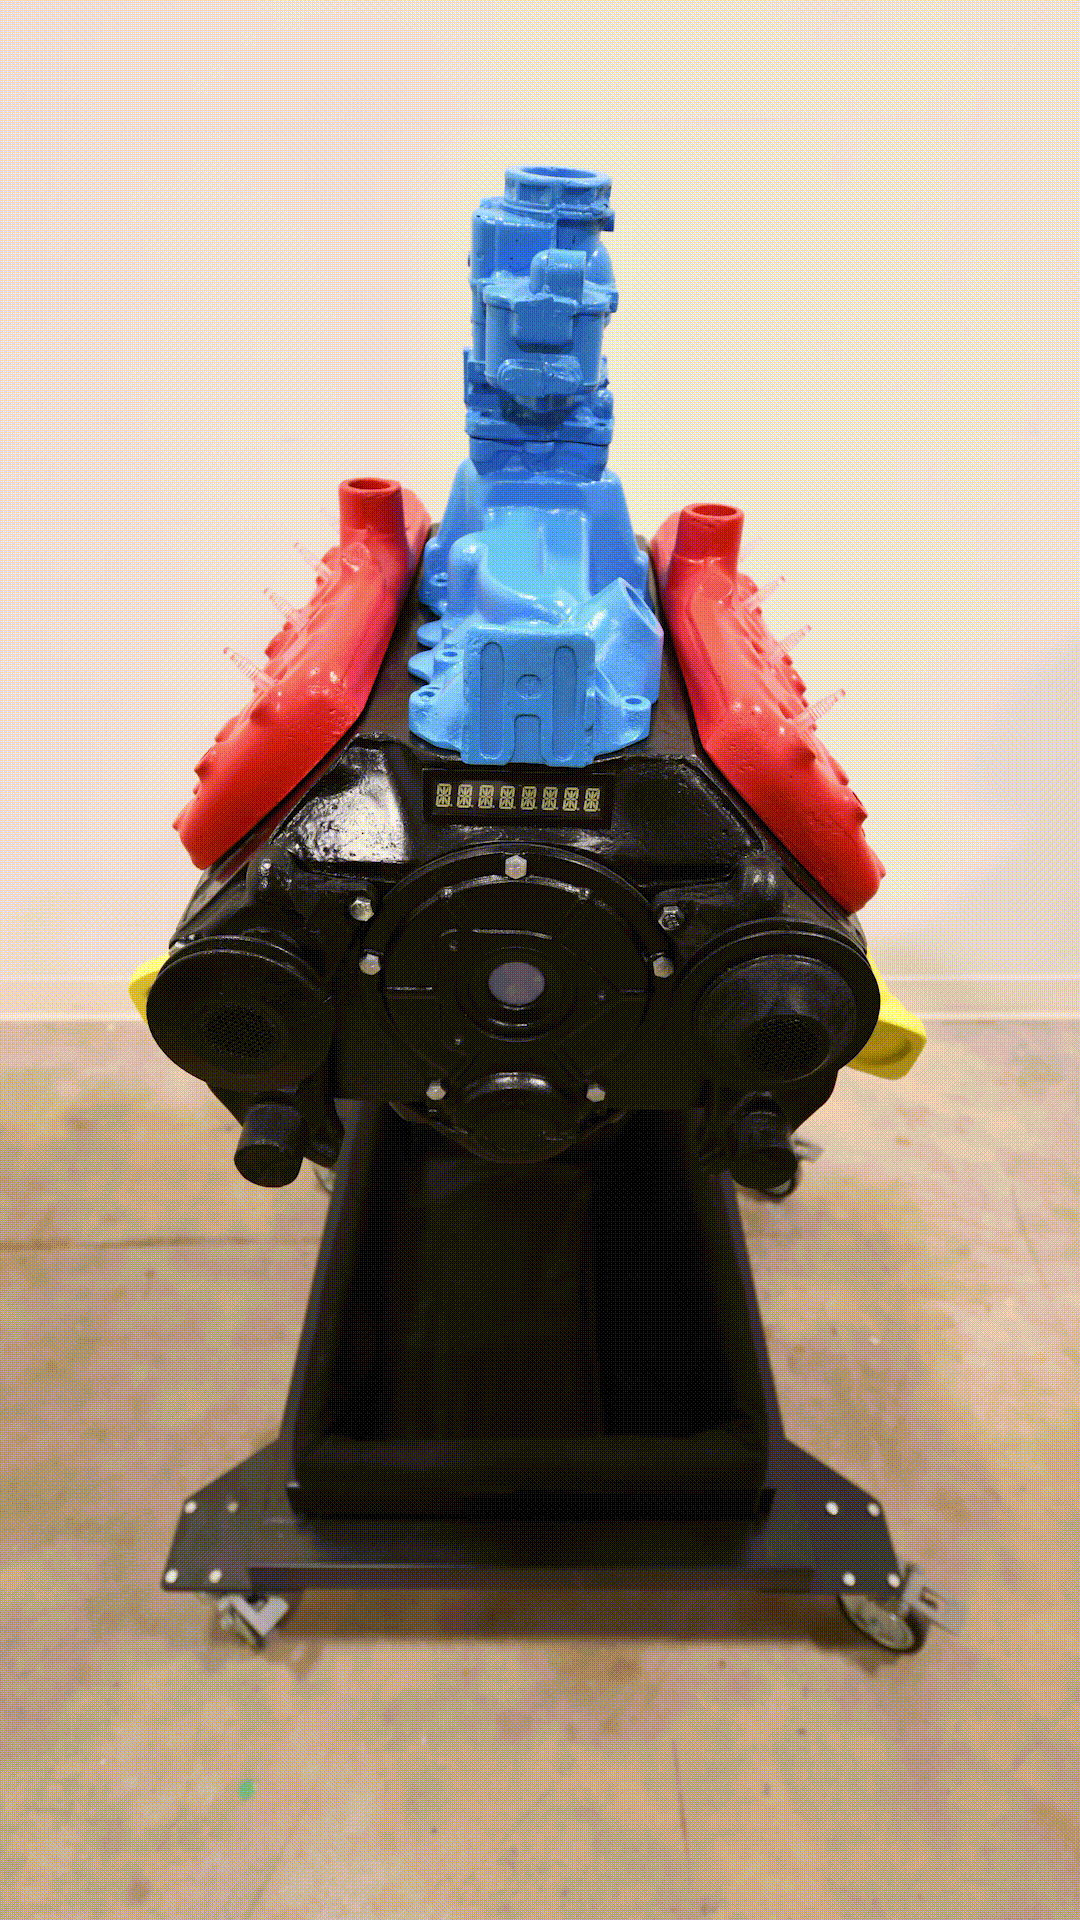 An animated image showing the Ford Flathead V-8 engine prototype from a variety of angles